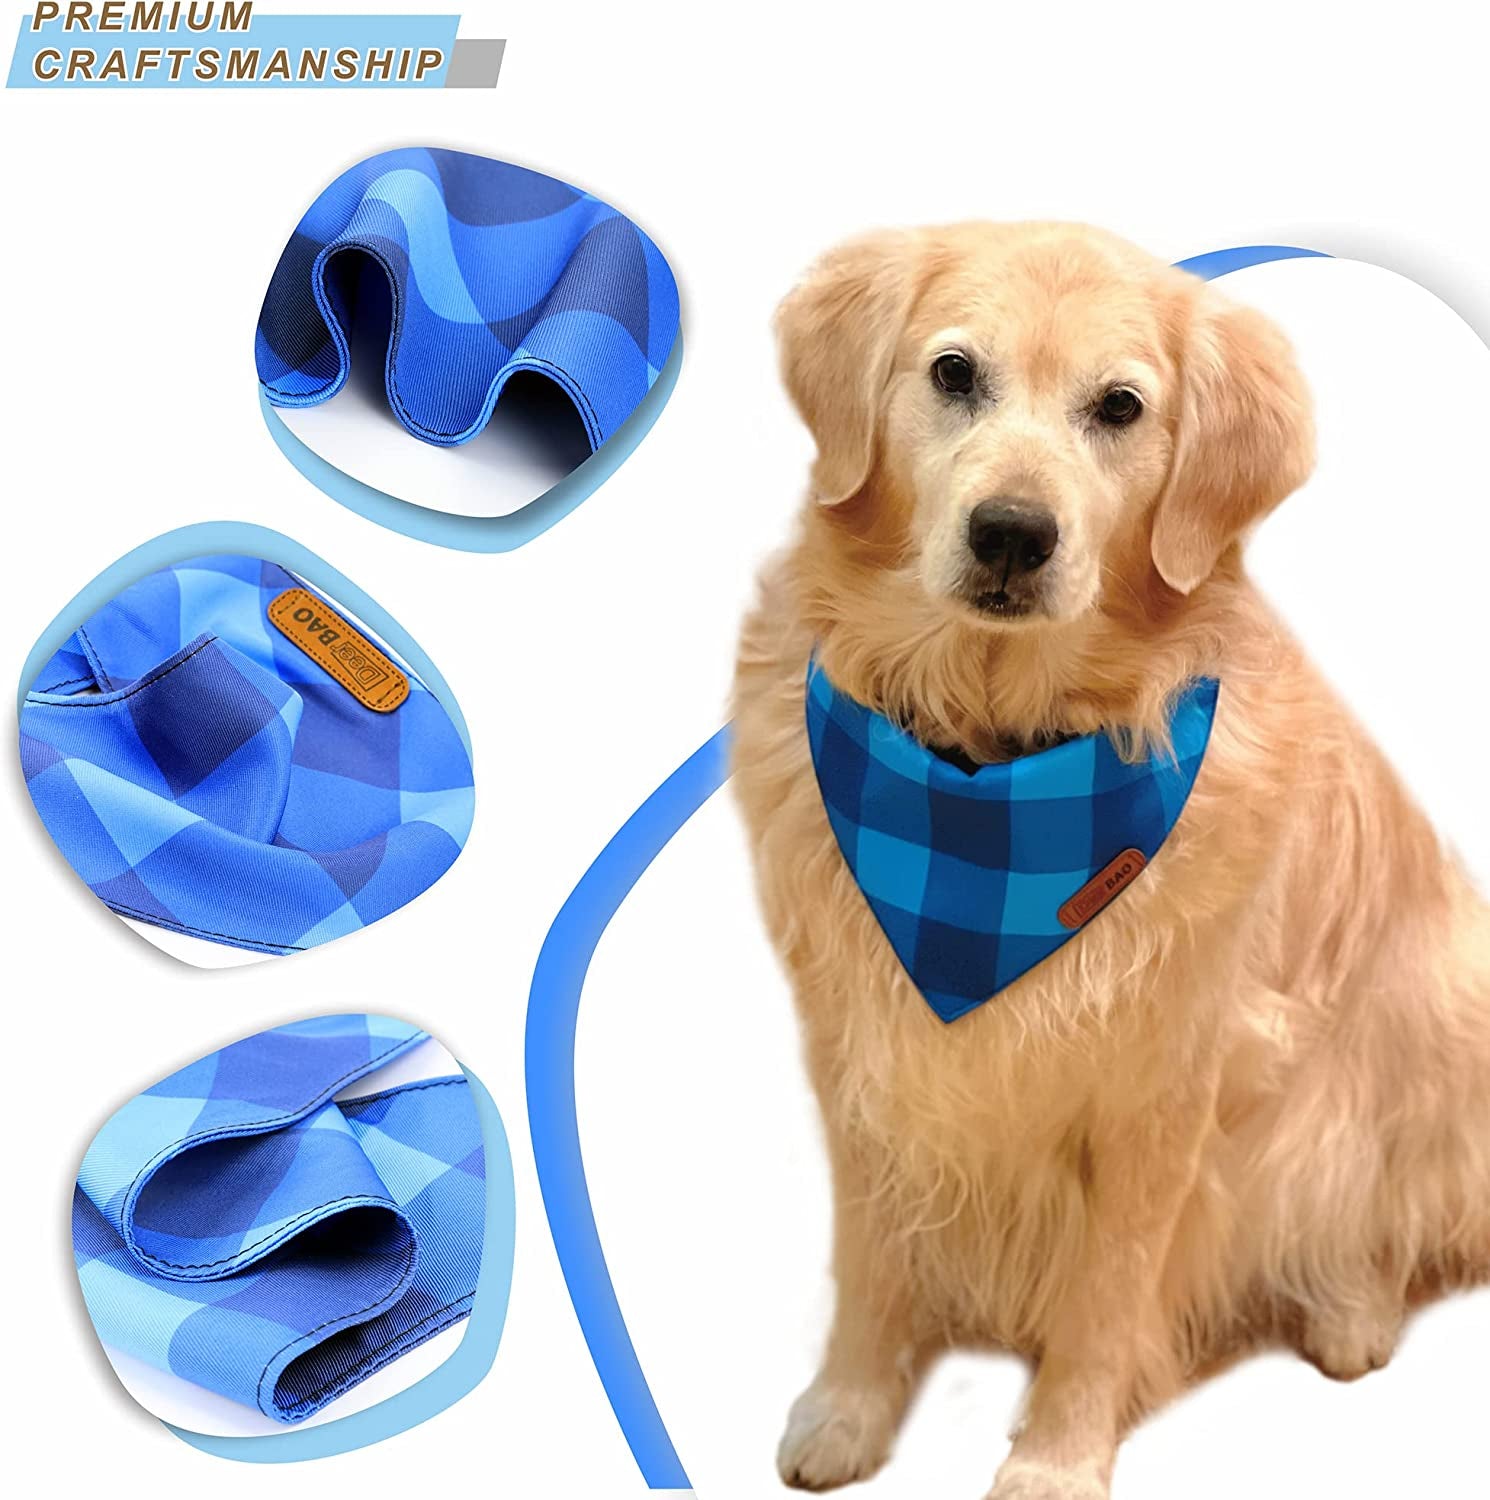 Deerbao Dog Bandanas 4Pack,Dog Scarf,Dog Bandanas Boygirl,Premium Durable Fabric,Adjustable Fit,Unique Shape,Suitable for All Kinds of Dogs,Provide Various Sizes (Large, Classic Plaid)